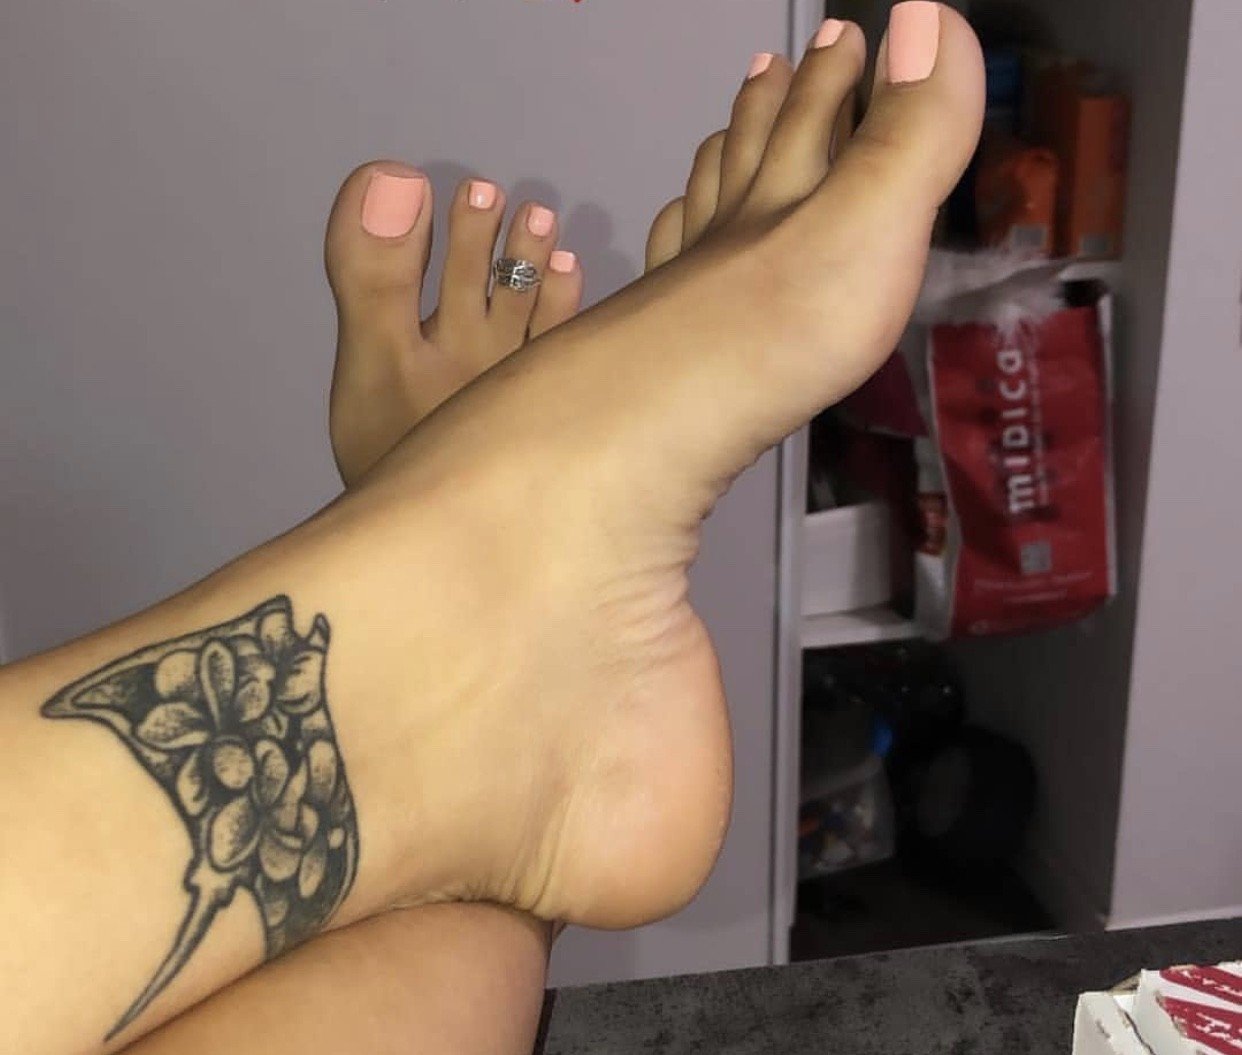 Watch the Photo by Cum4toes with the username @Cum4toes, posted on January 24, 2019